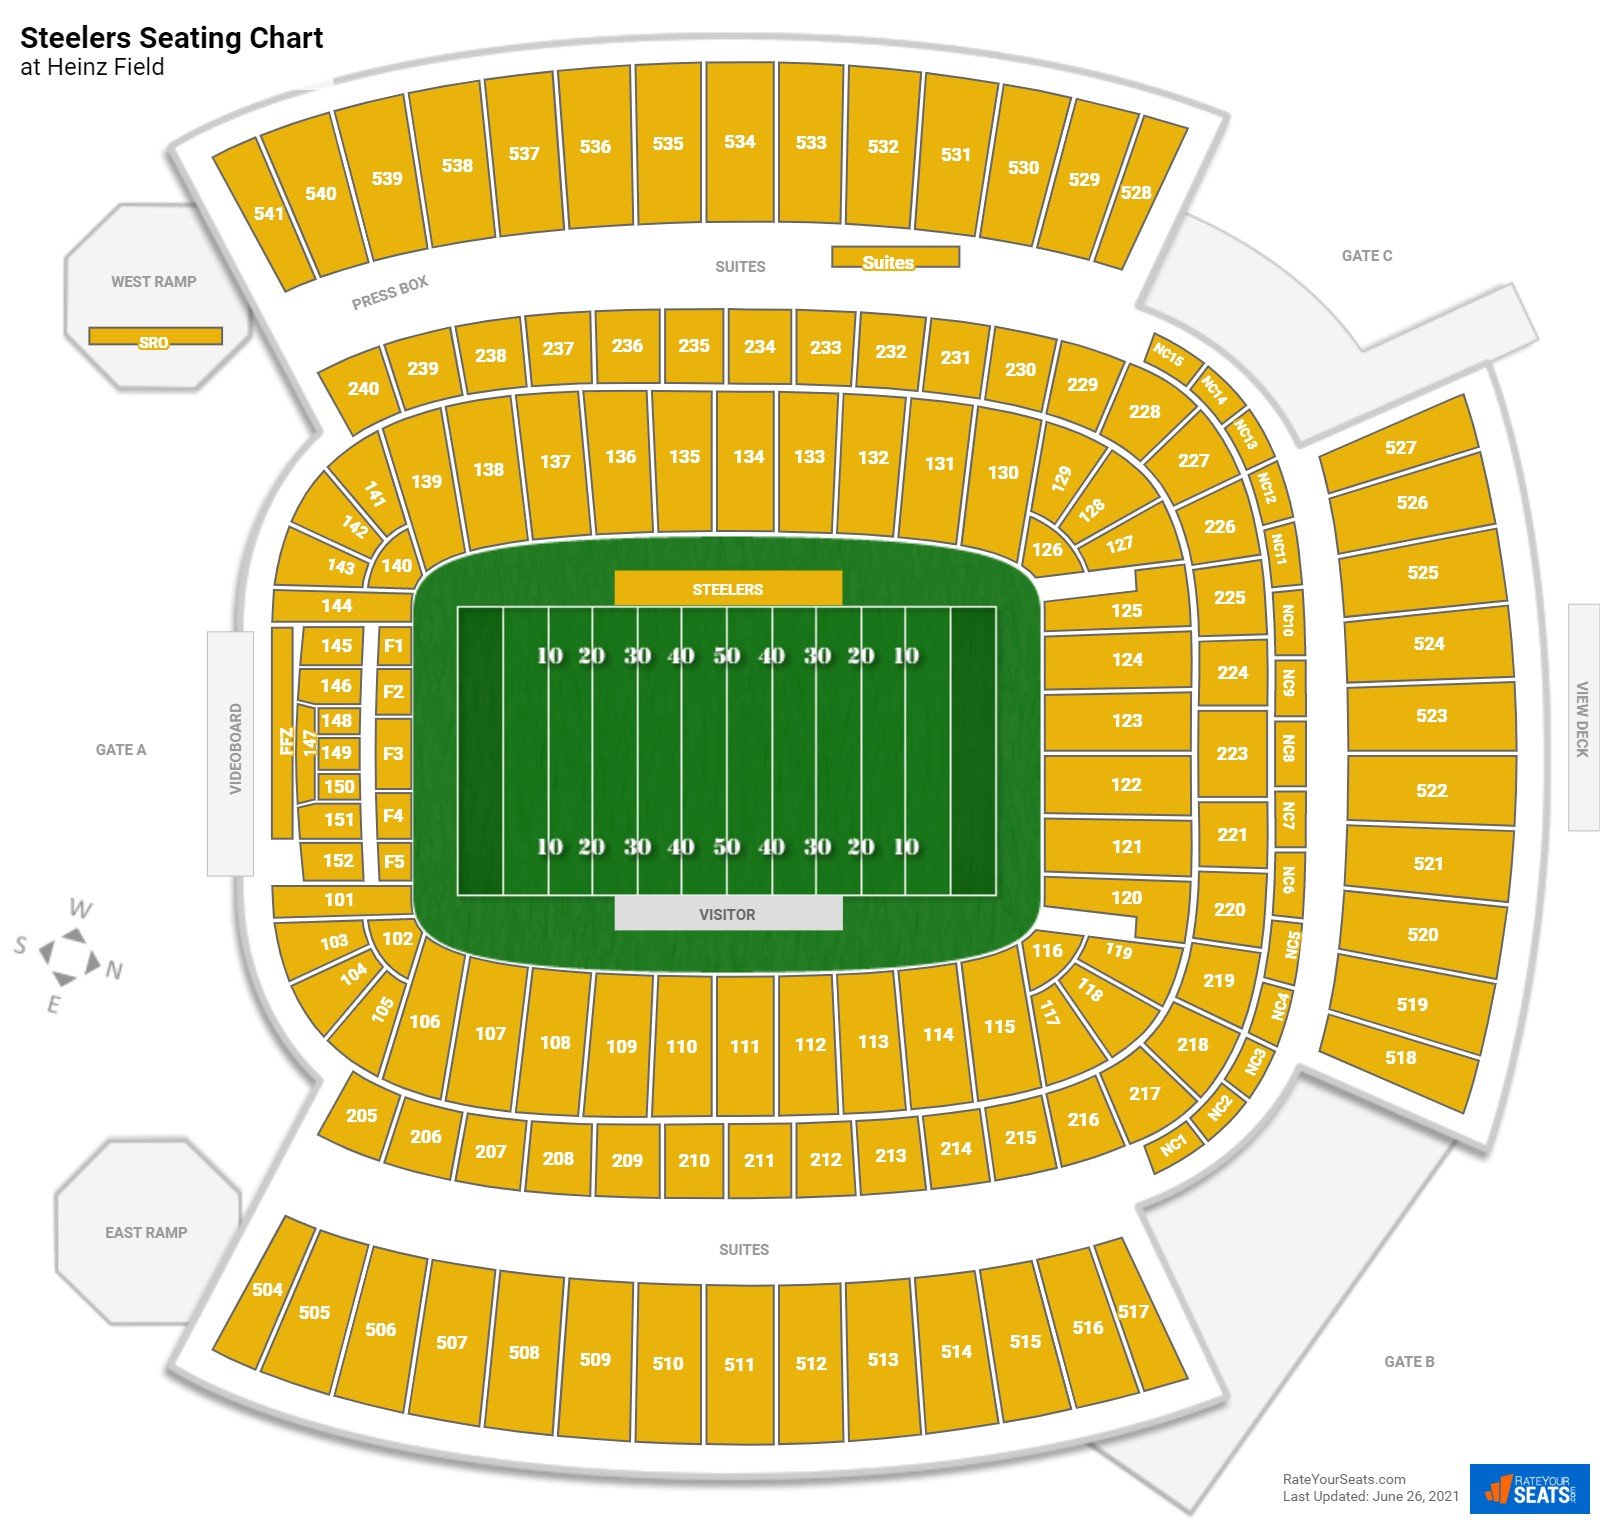 Pittsburgh Steelers Seating Chart at Heinz Field